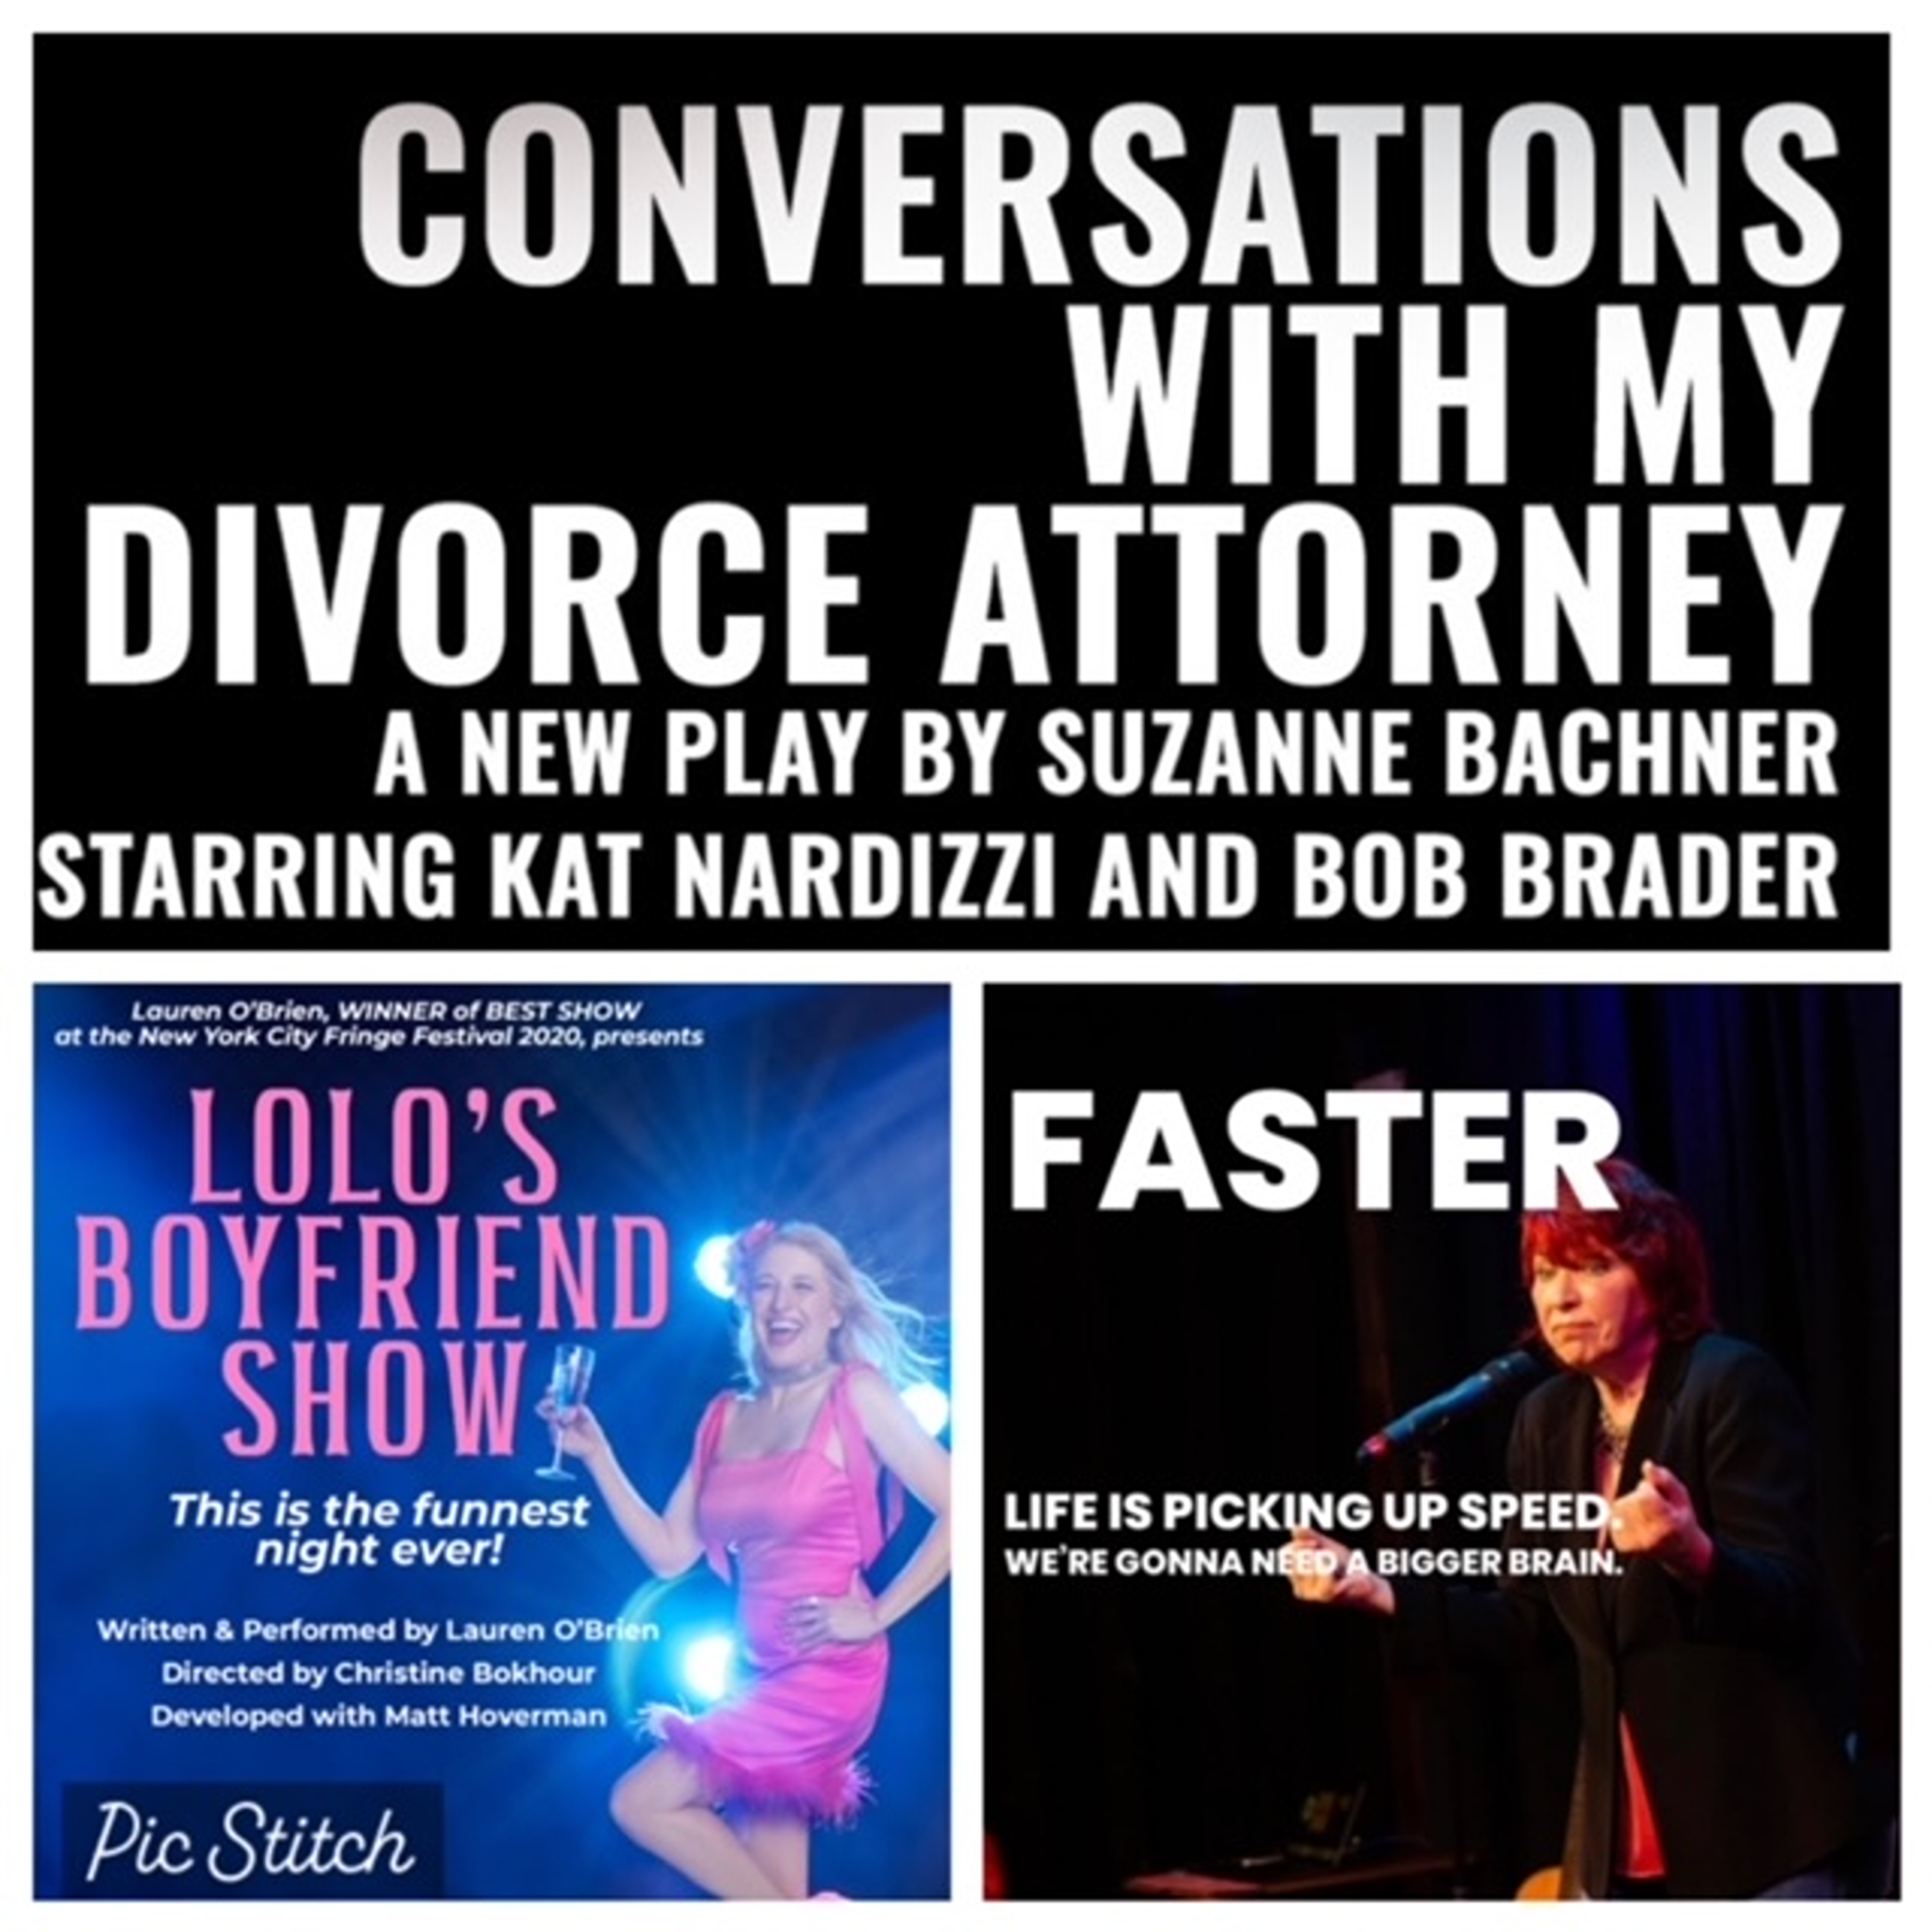 NYC Fringe Festival with Jude Treder-Wolff, Lauren O’Brien and Suzanne Bachner